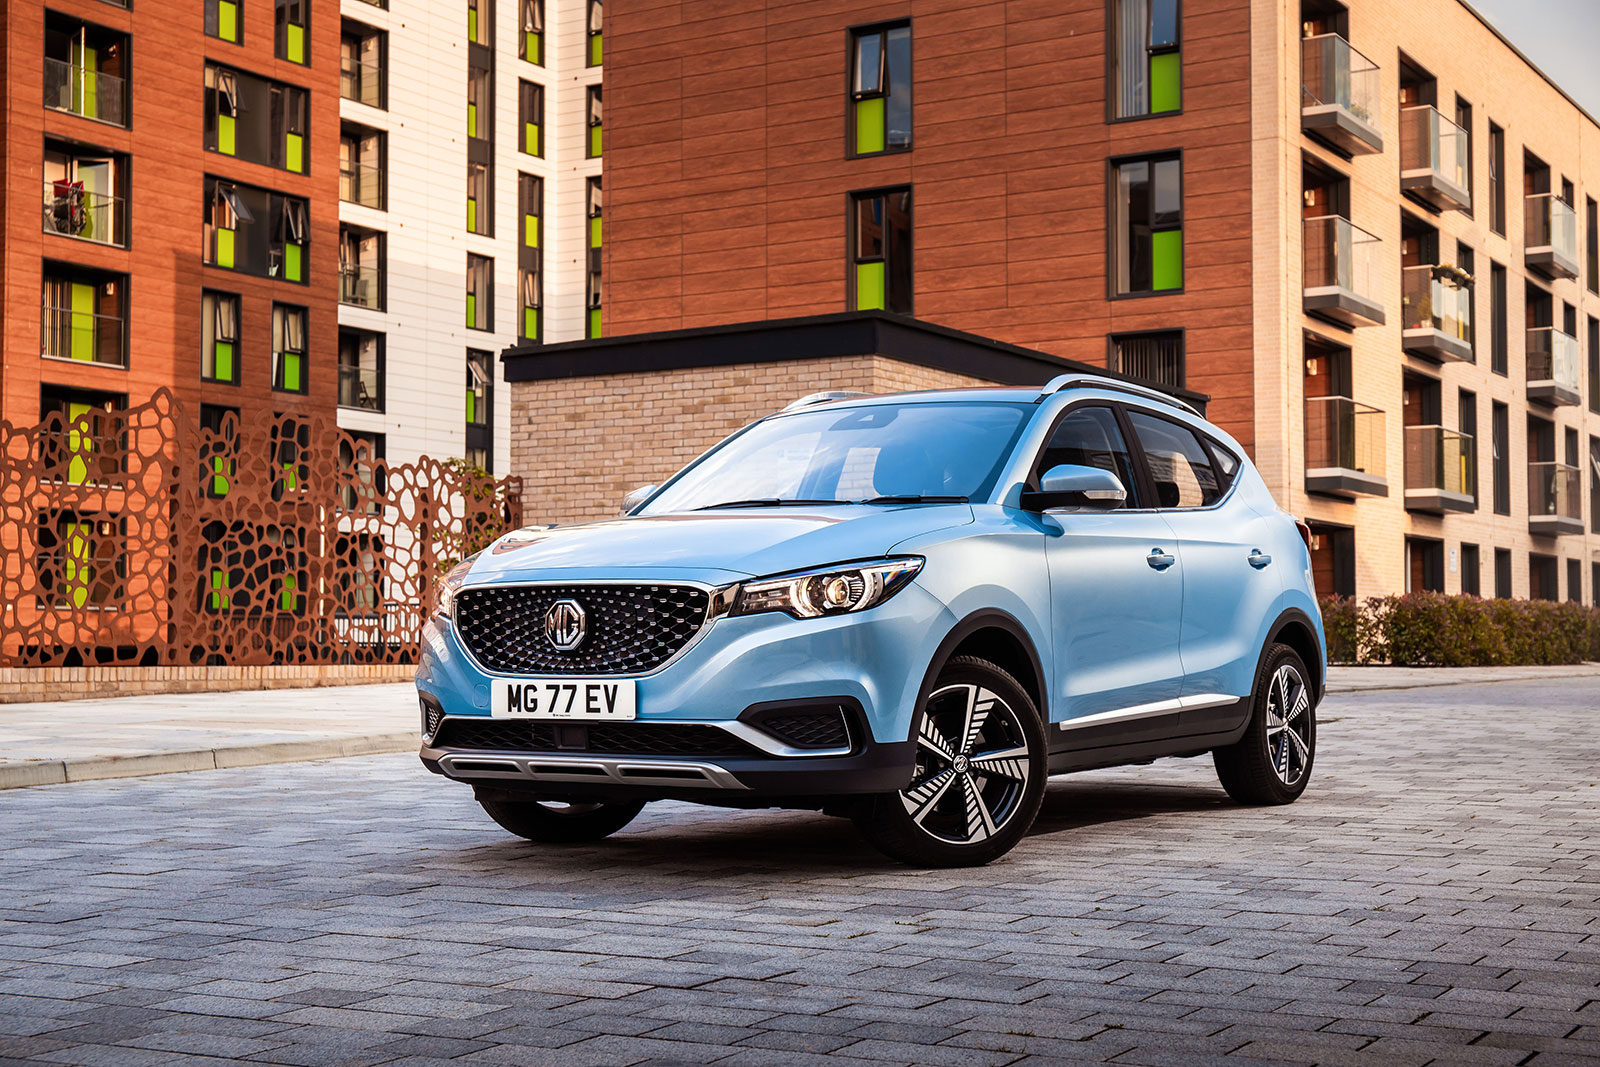 Iconic British brand MG launches the MG ZS EV family friendly fully